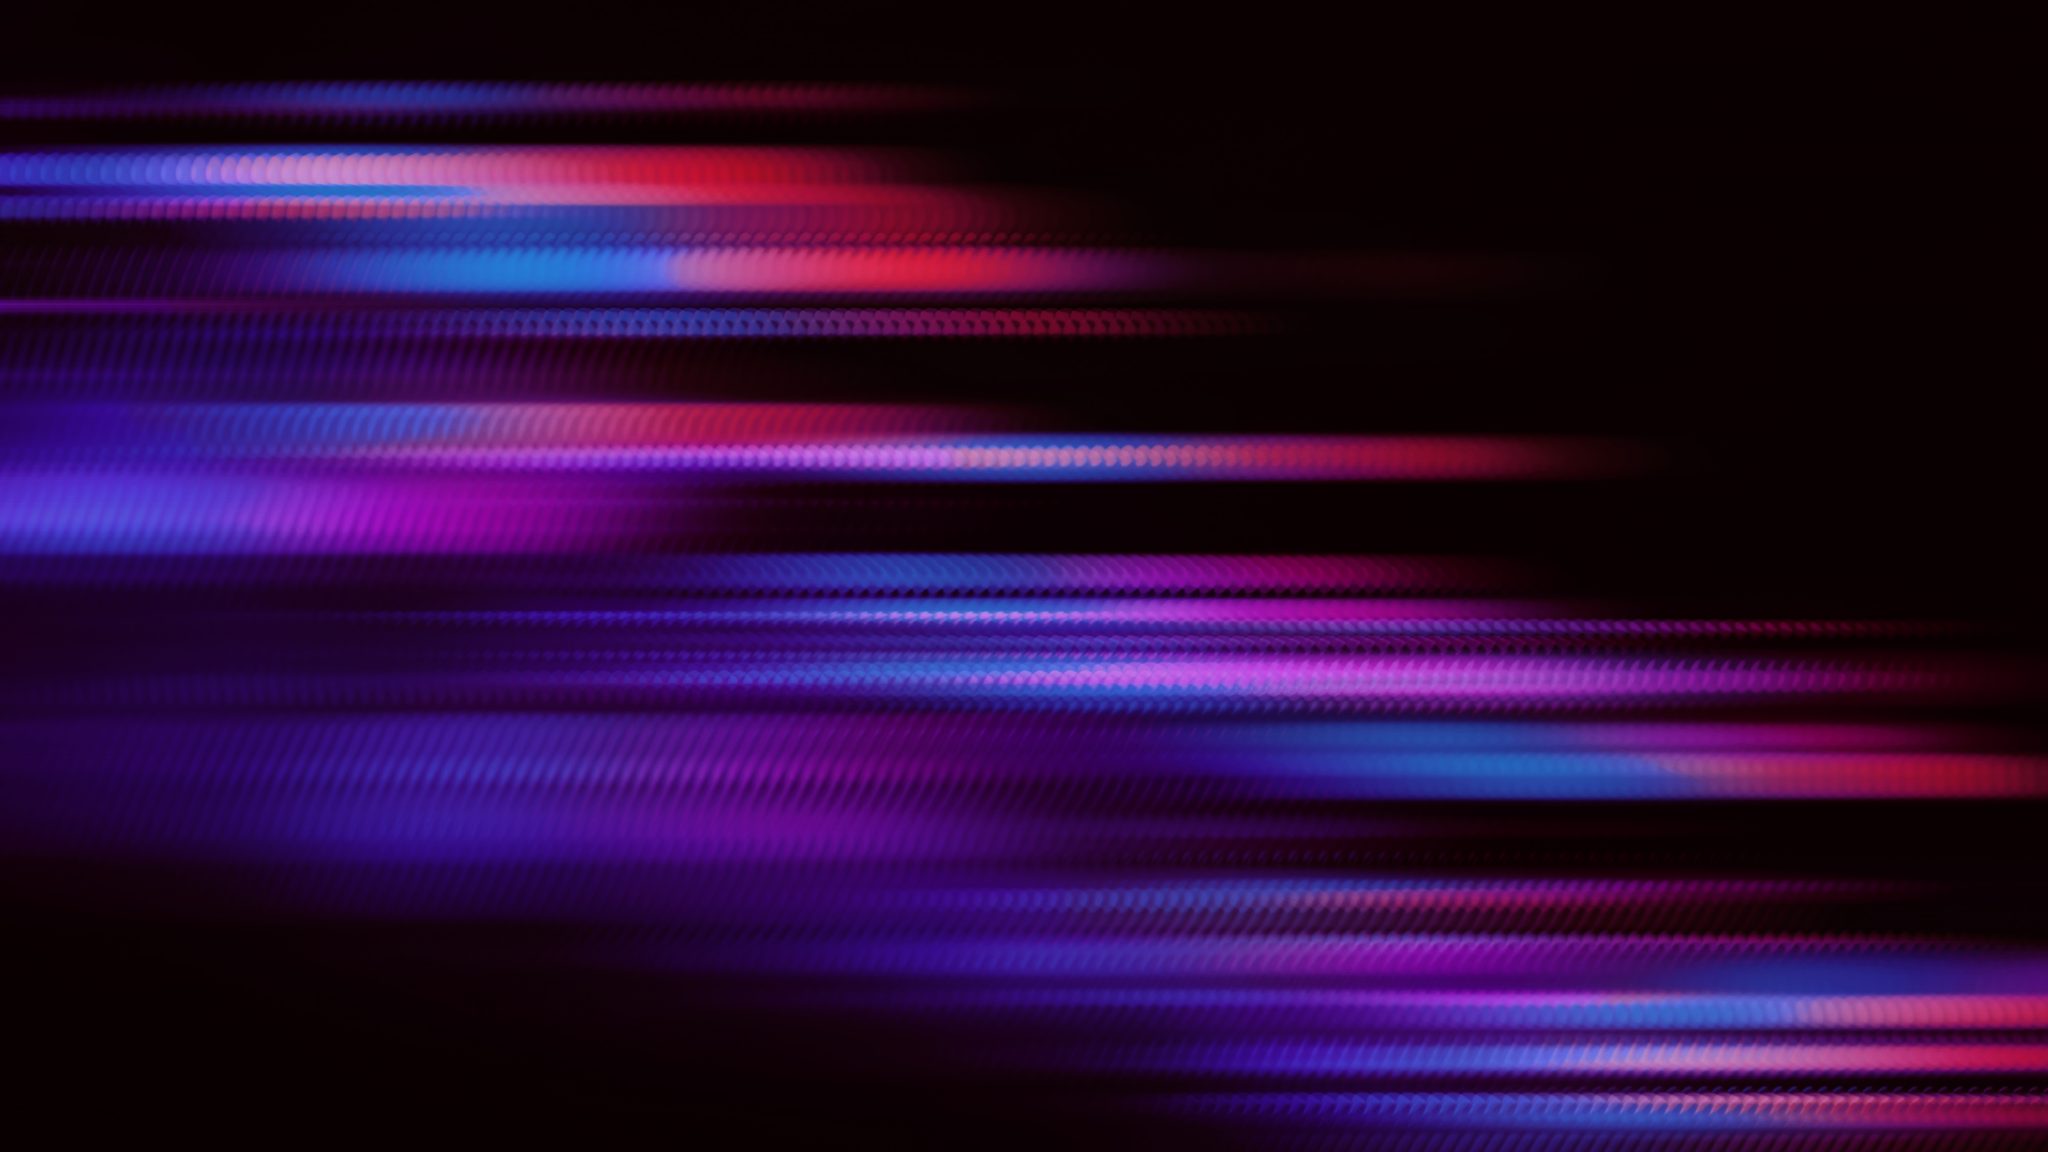 purple and black abstract backgrounds